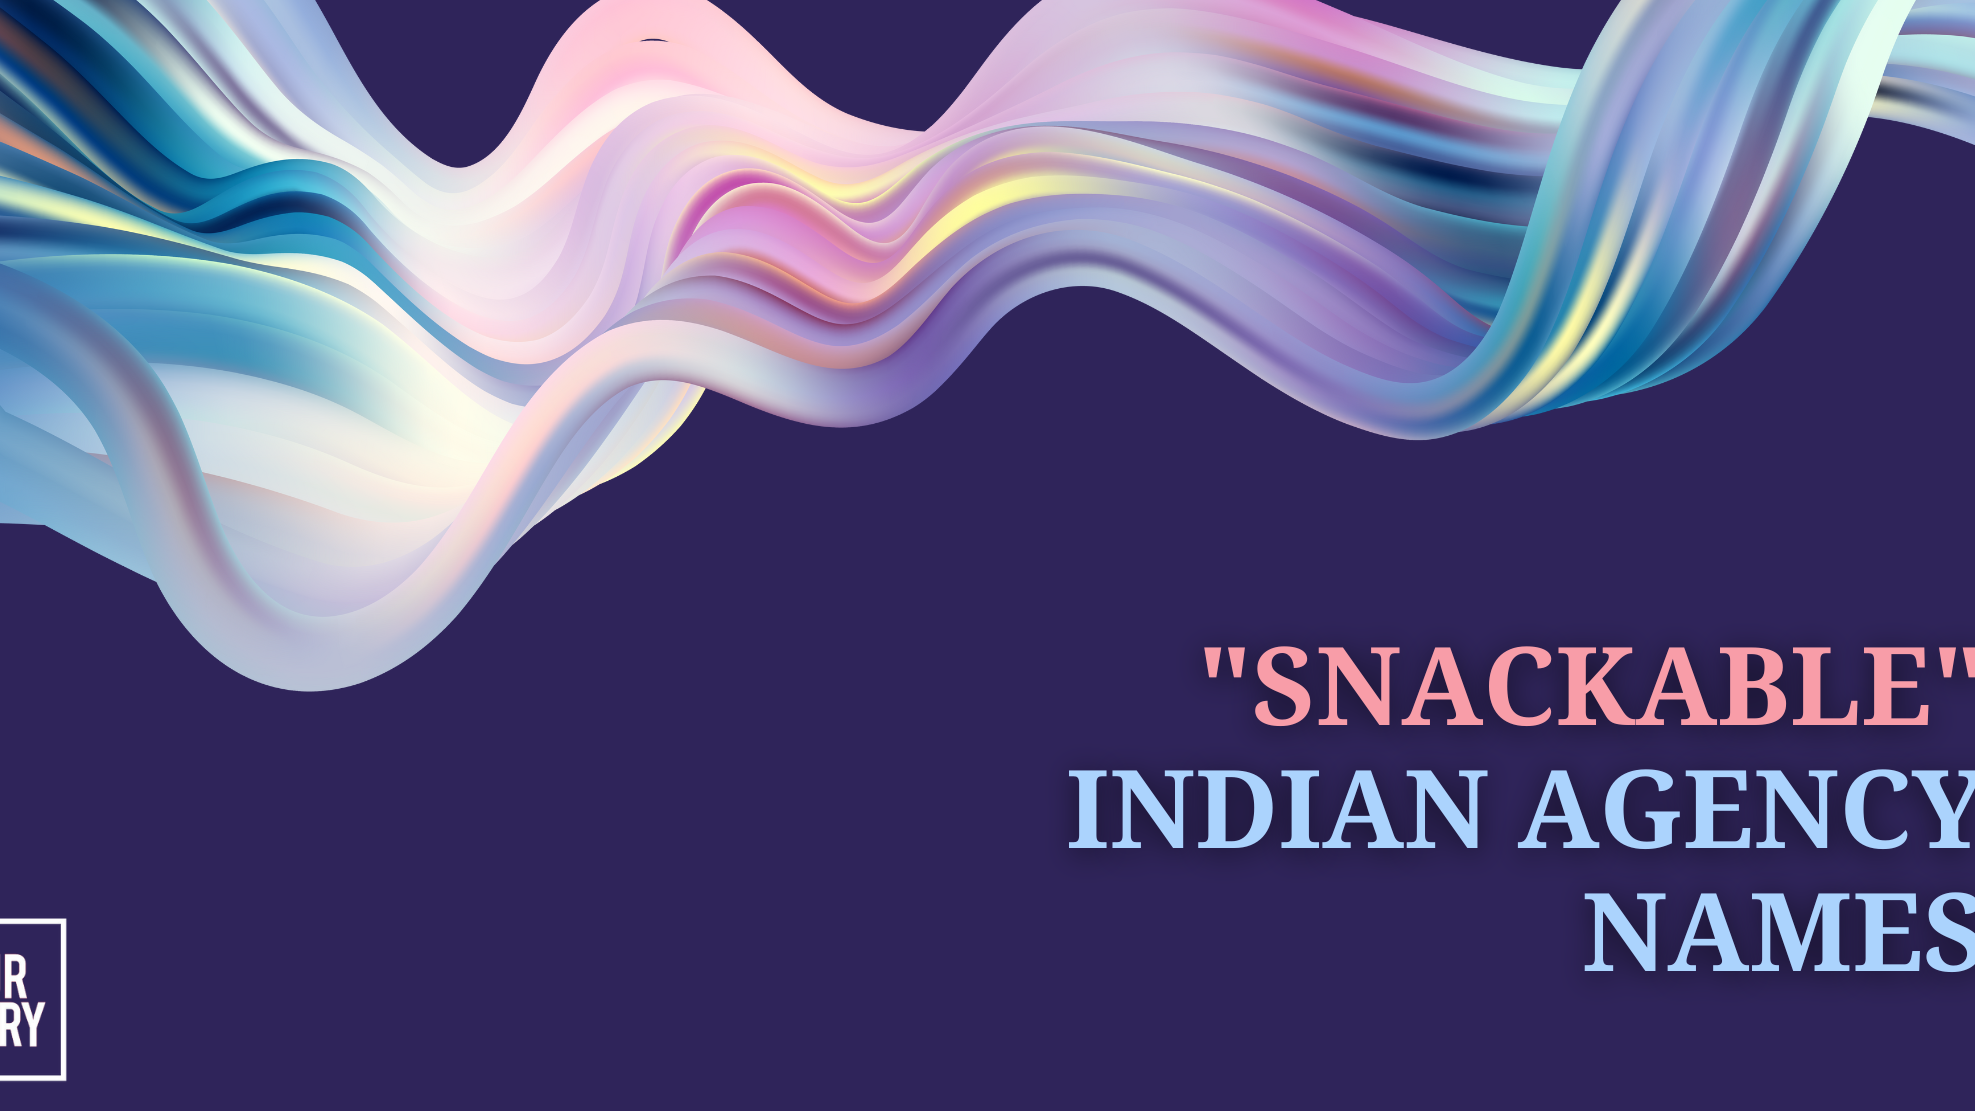 How Indian Agencies are Using "Snackable" Names to Stand Out